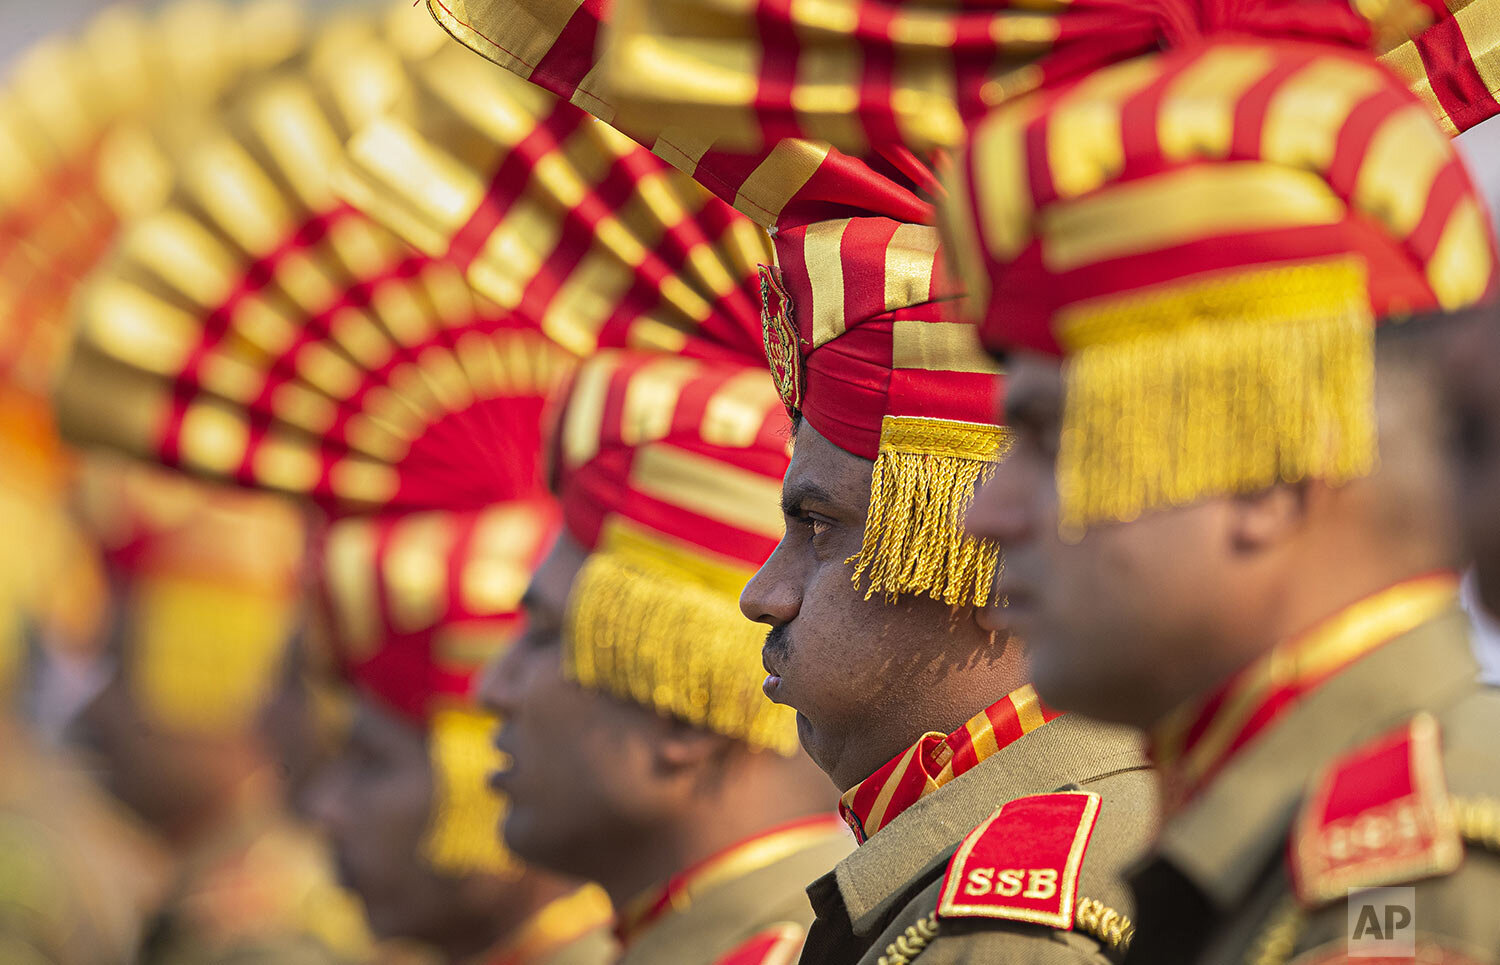  An Indian Sashastra Seema Bal paramilitary soldier breathes through mouth as he participates in a parade to mark Republic Day in Gauhati, India, Sunday, Jan. 26, 2020.  (AP Photo/Anupam Nath) 